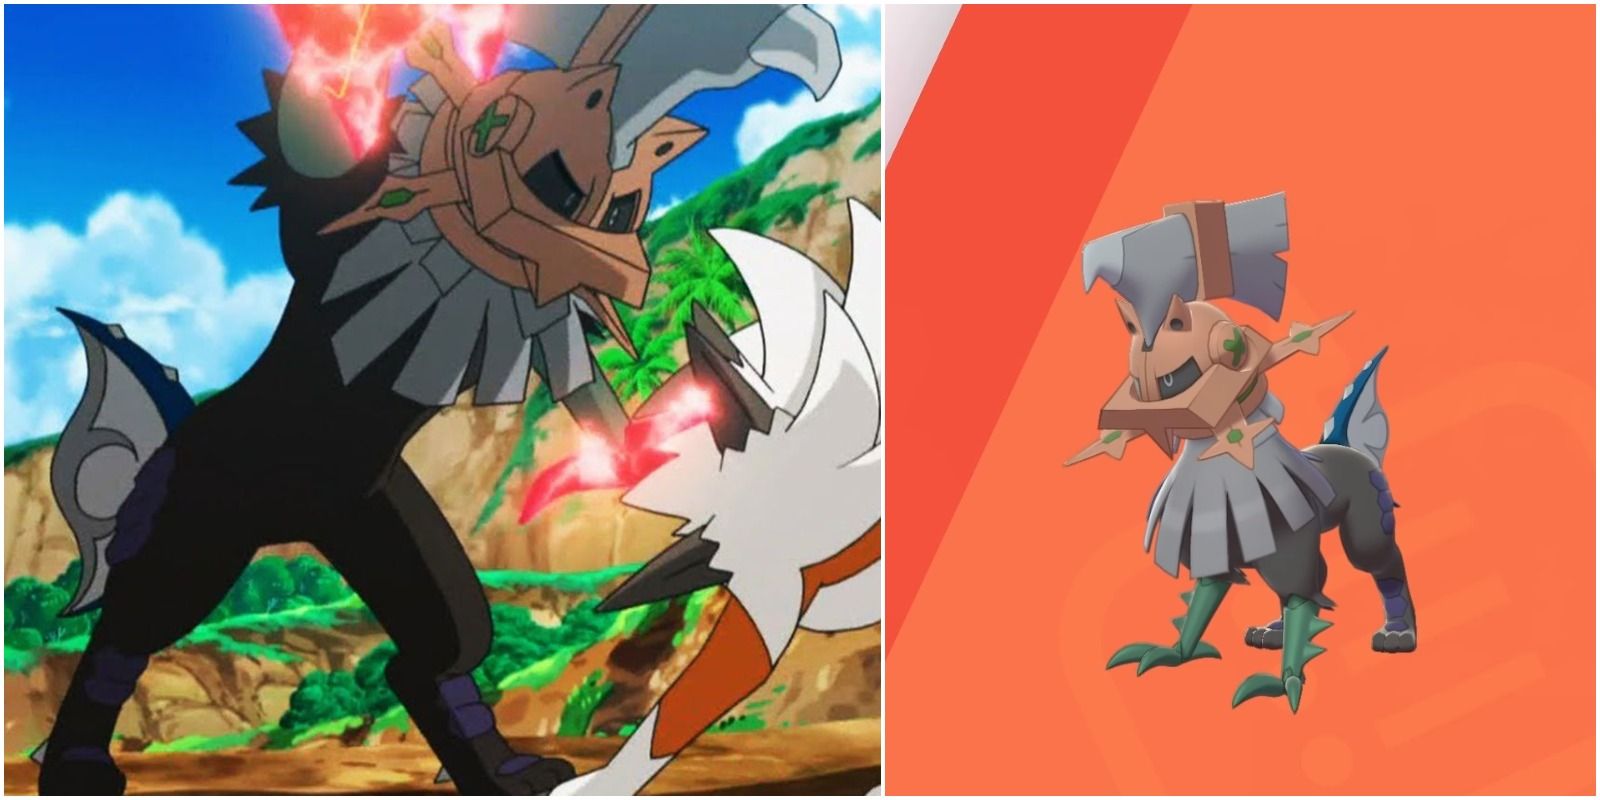 Type: Null in the anime battling lycanroc and on the pokedex screen for pokemon sword & shield.